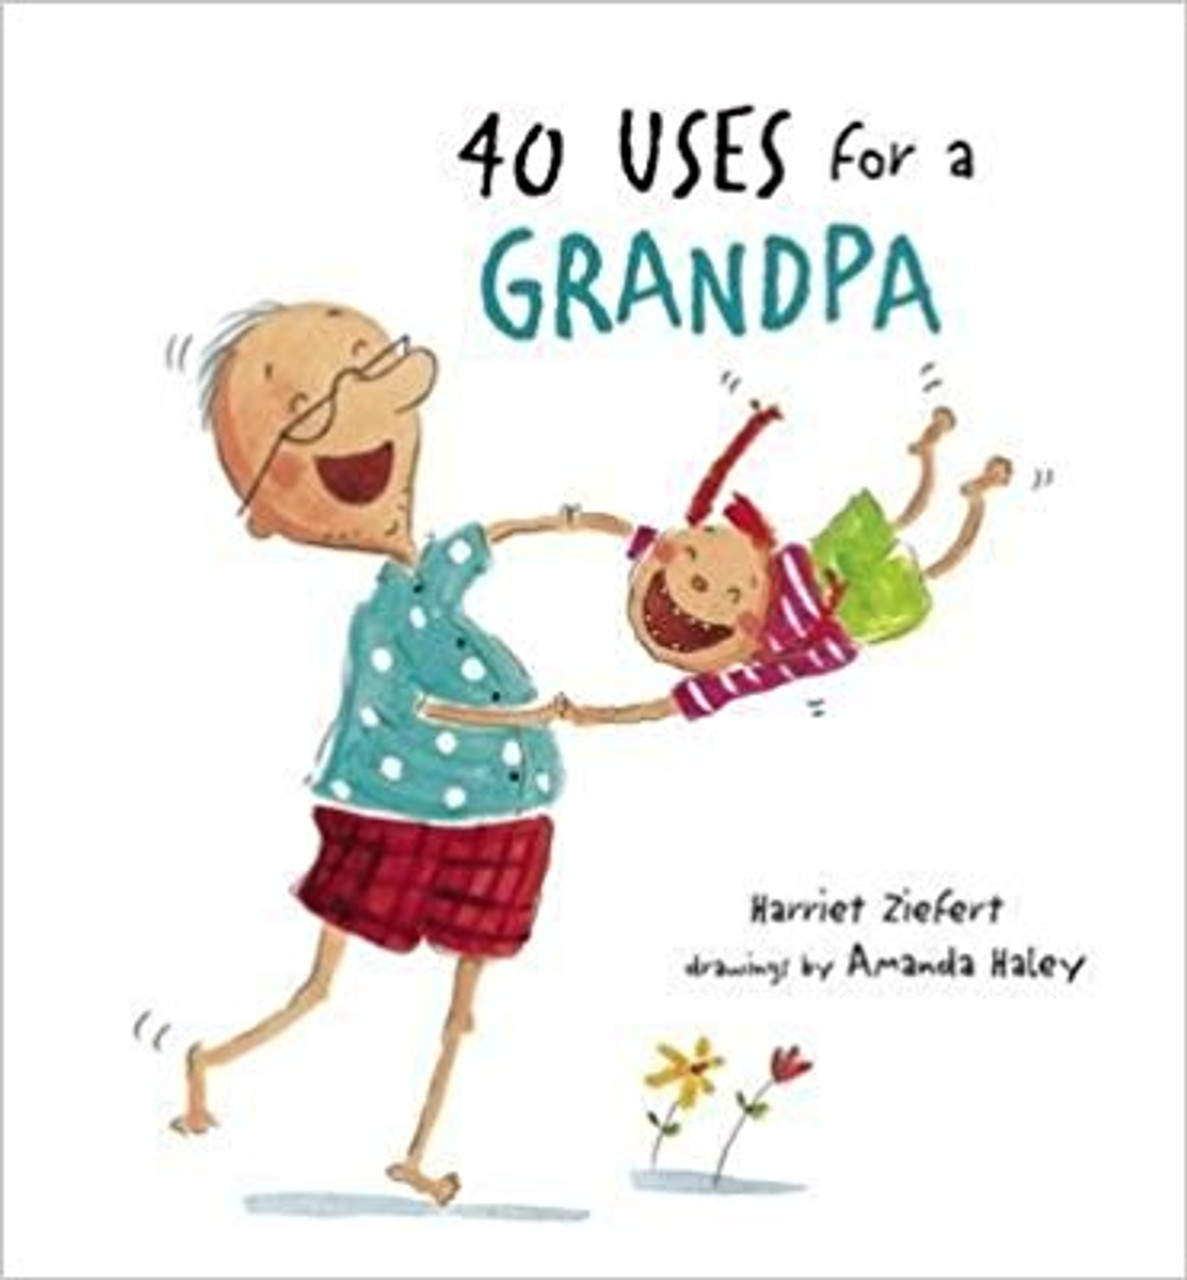 40 Uses for a Grandpa by Harriet Ziefert